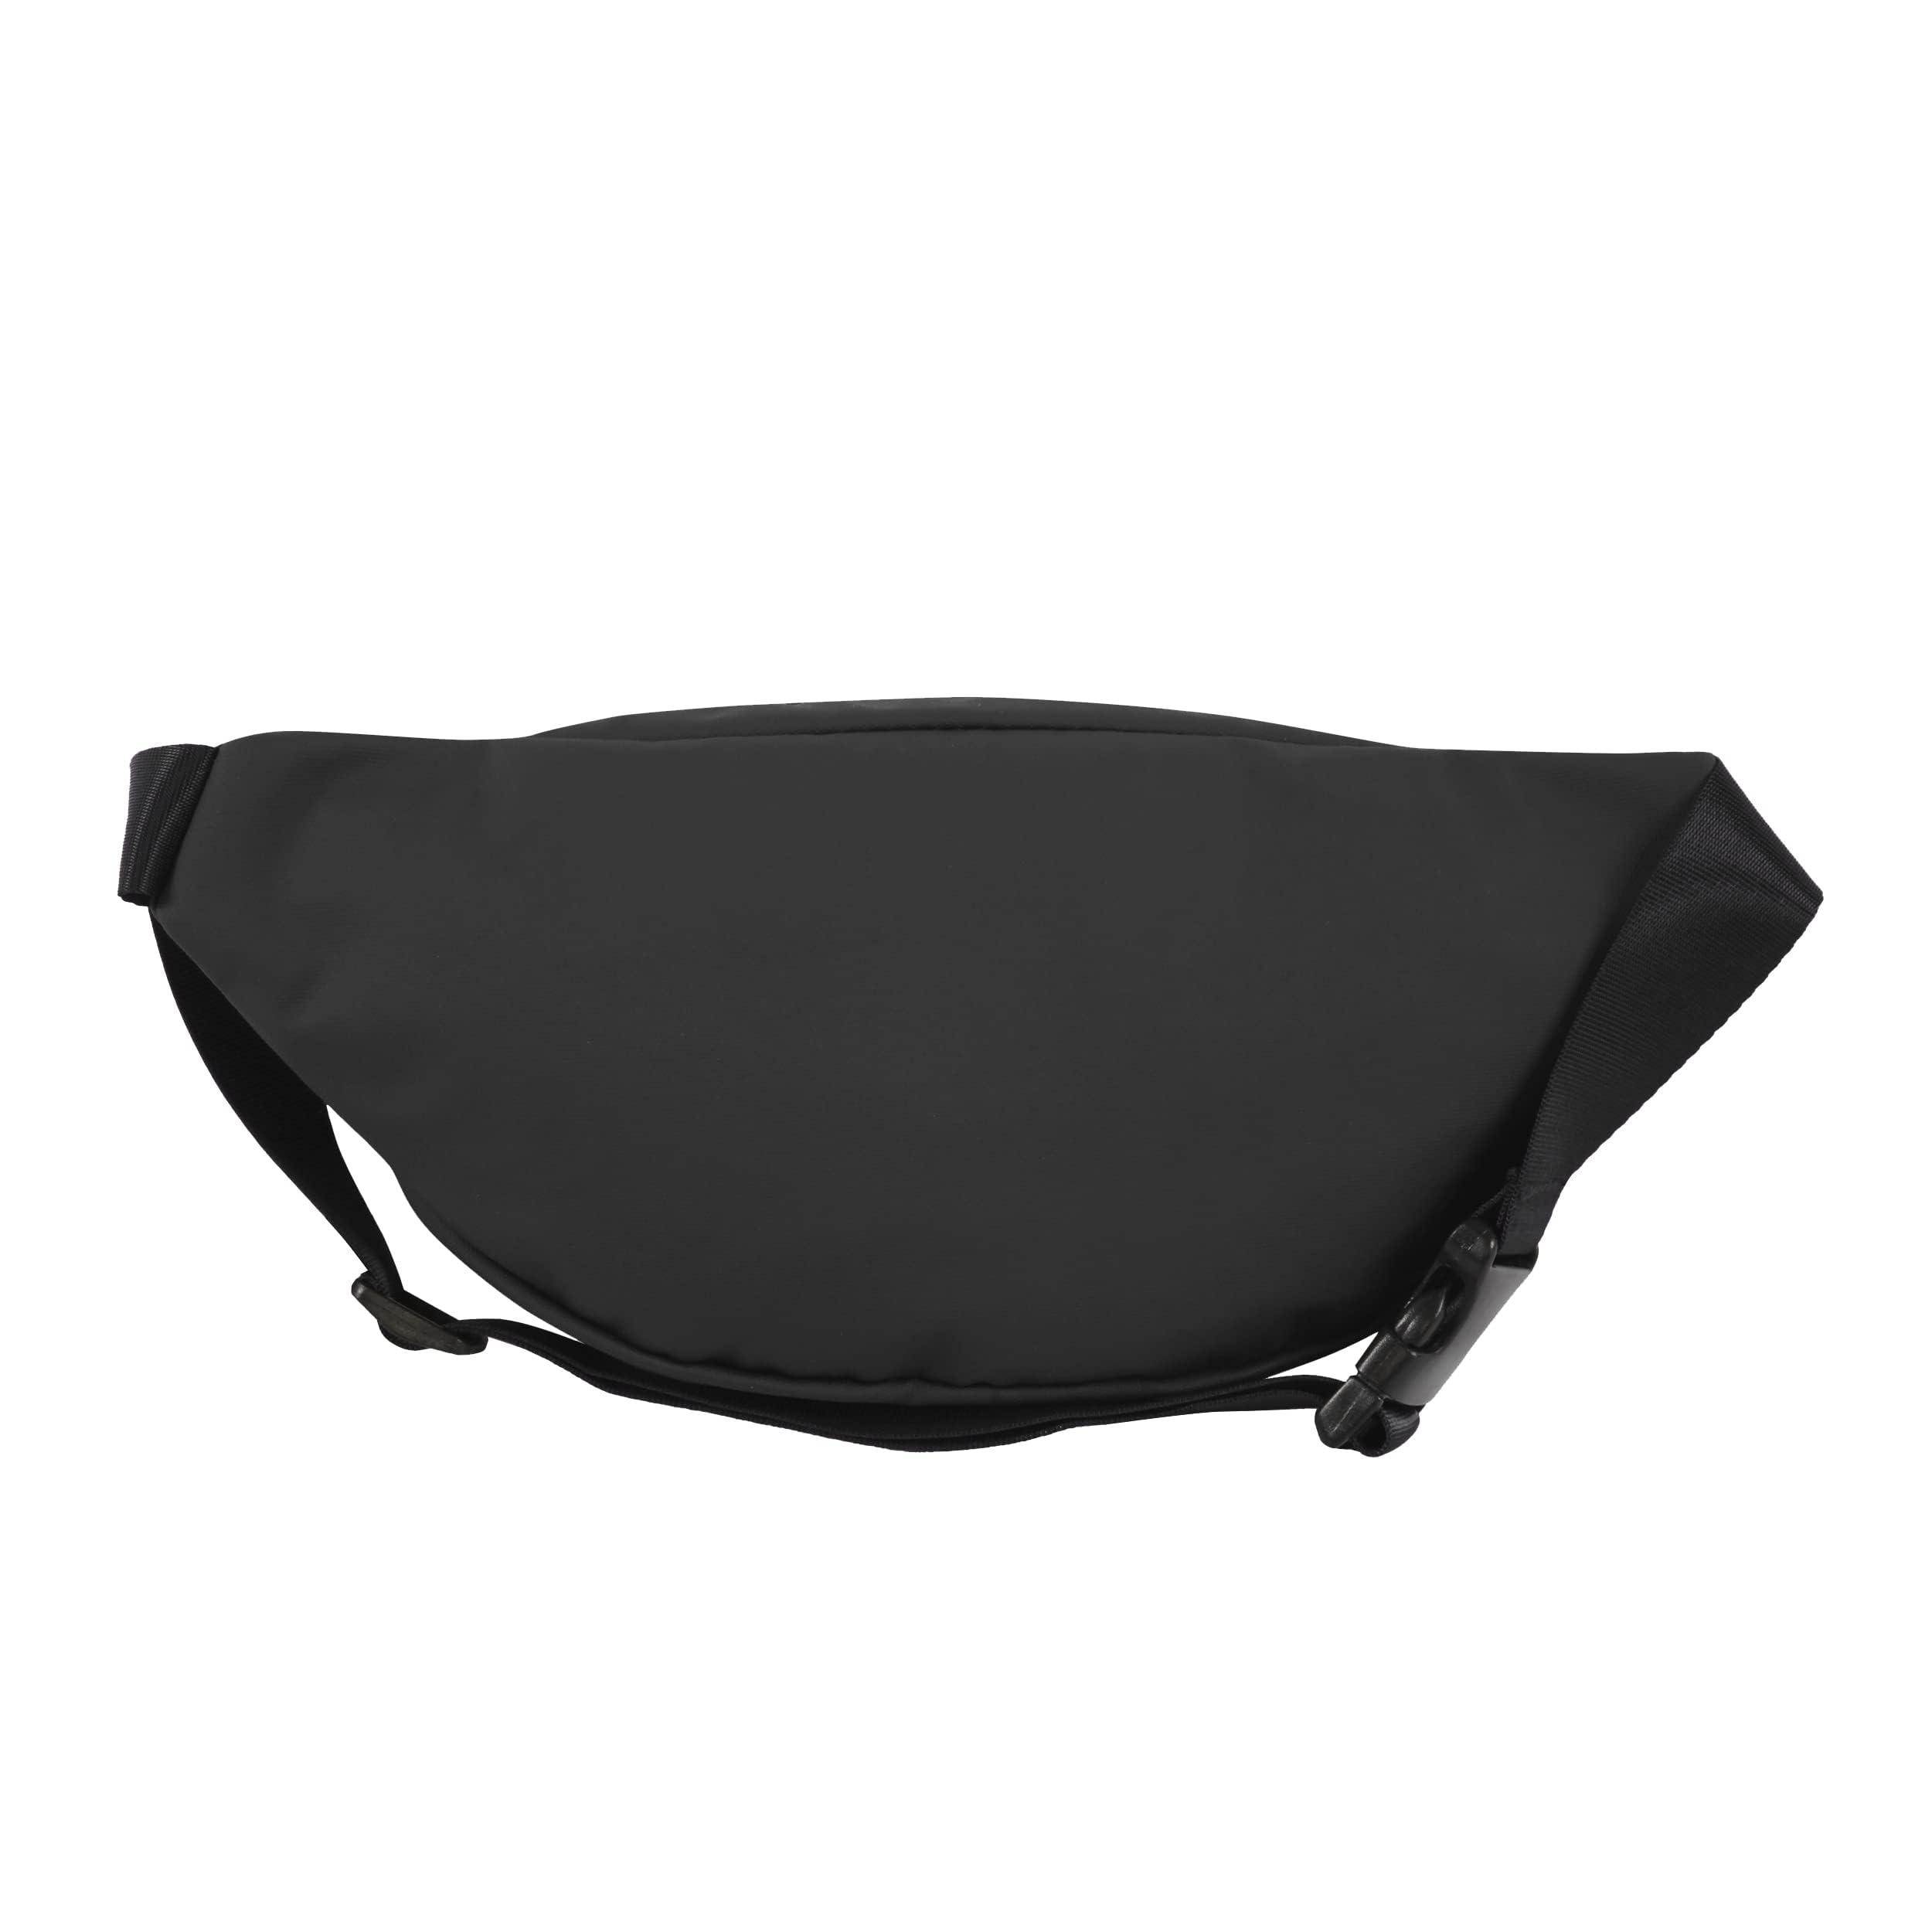 NAUTICA Fanny Pack, Black Navy, One Size